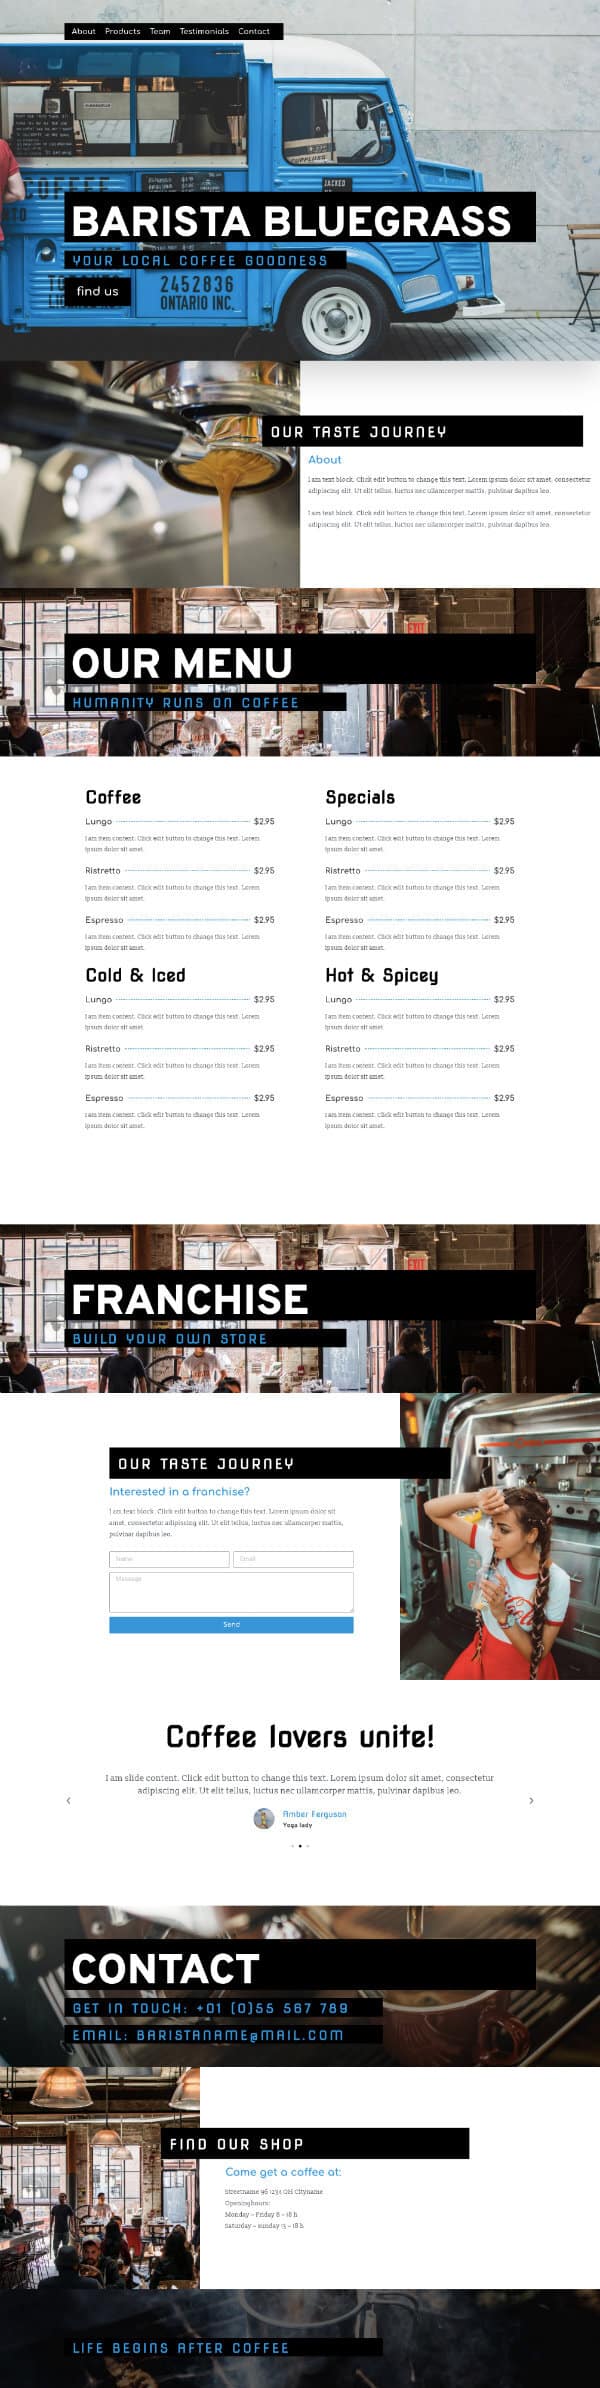 Task IT - Example Website for a Café